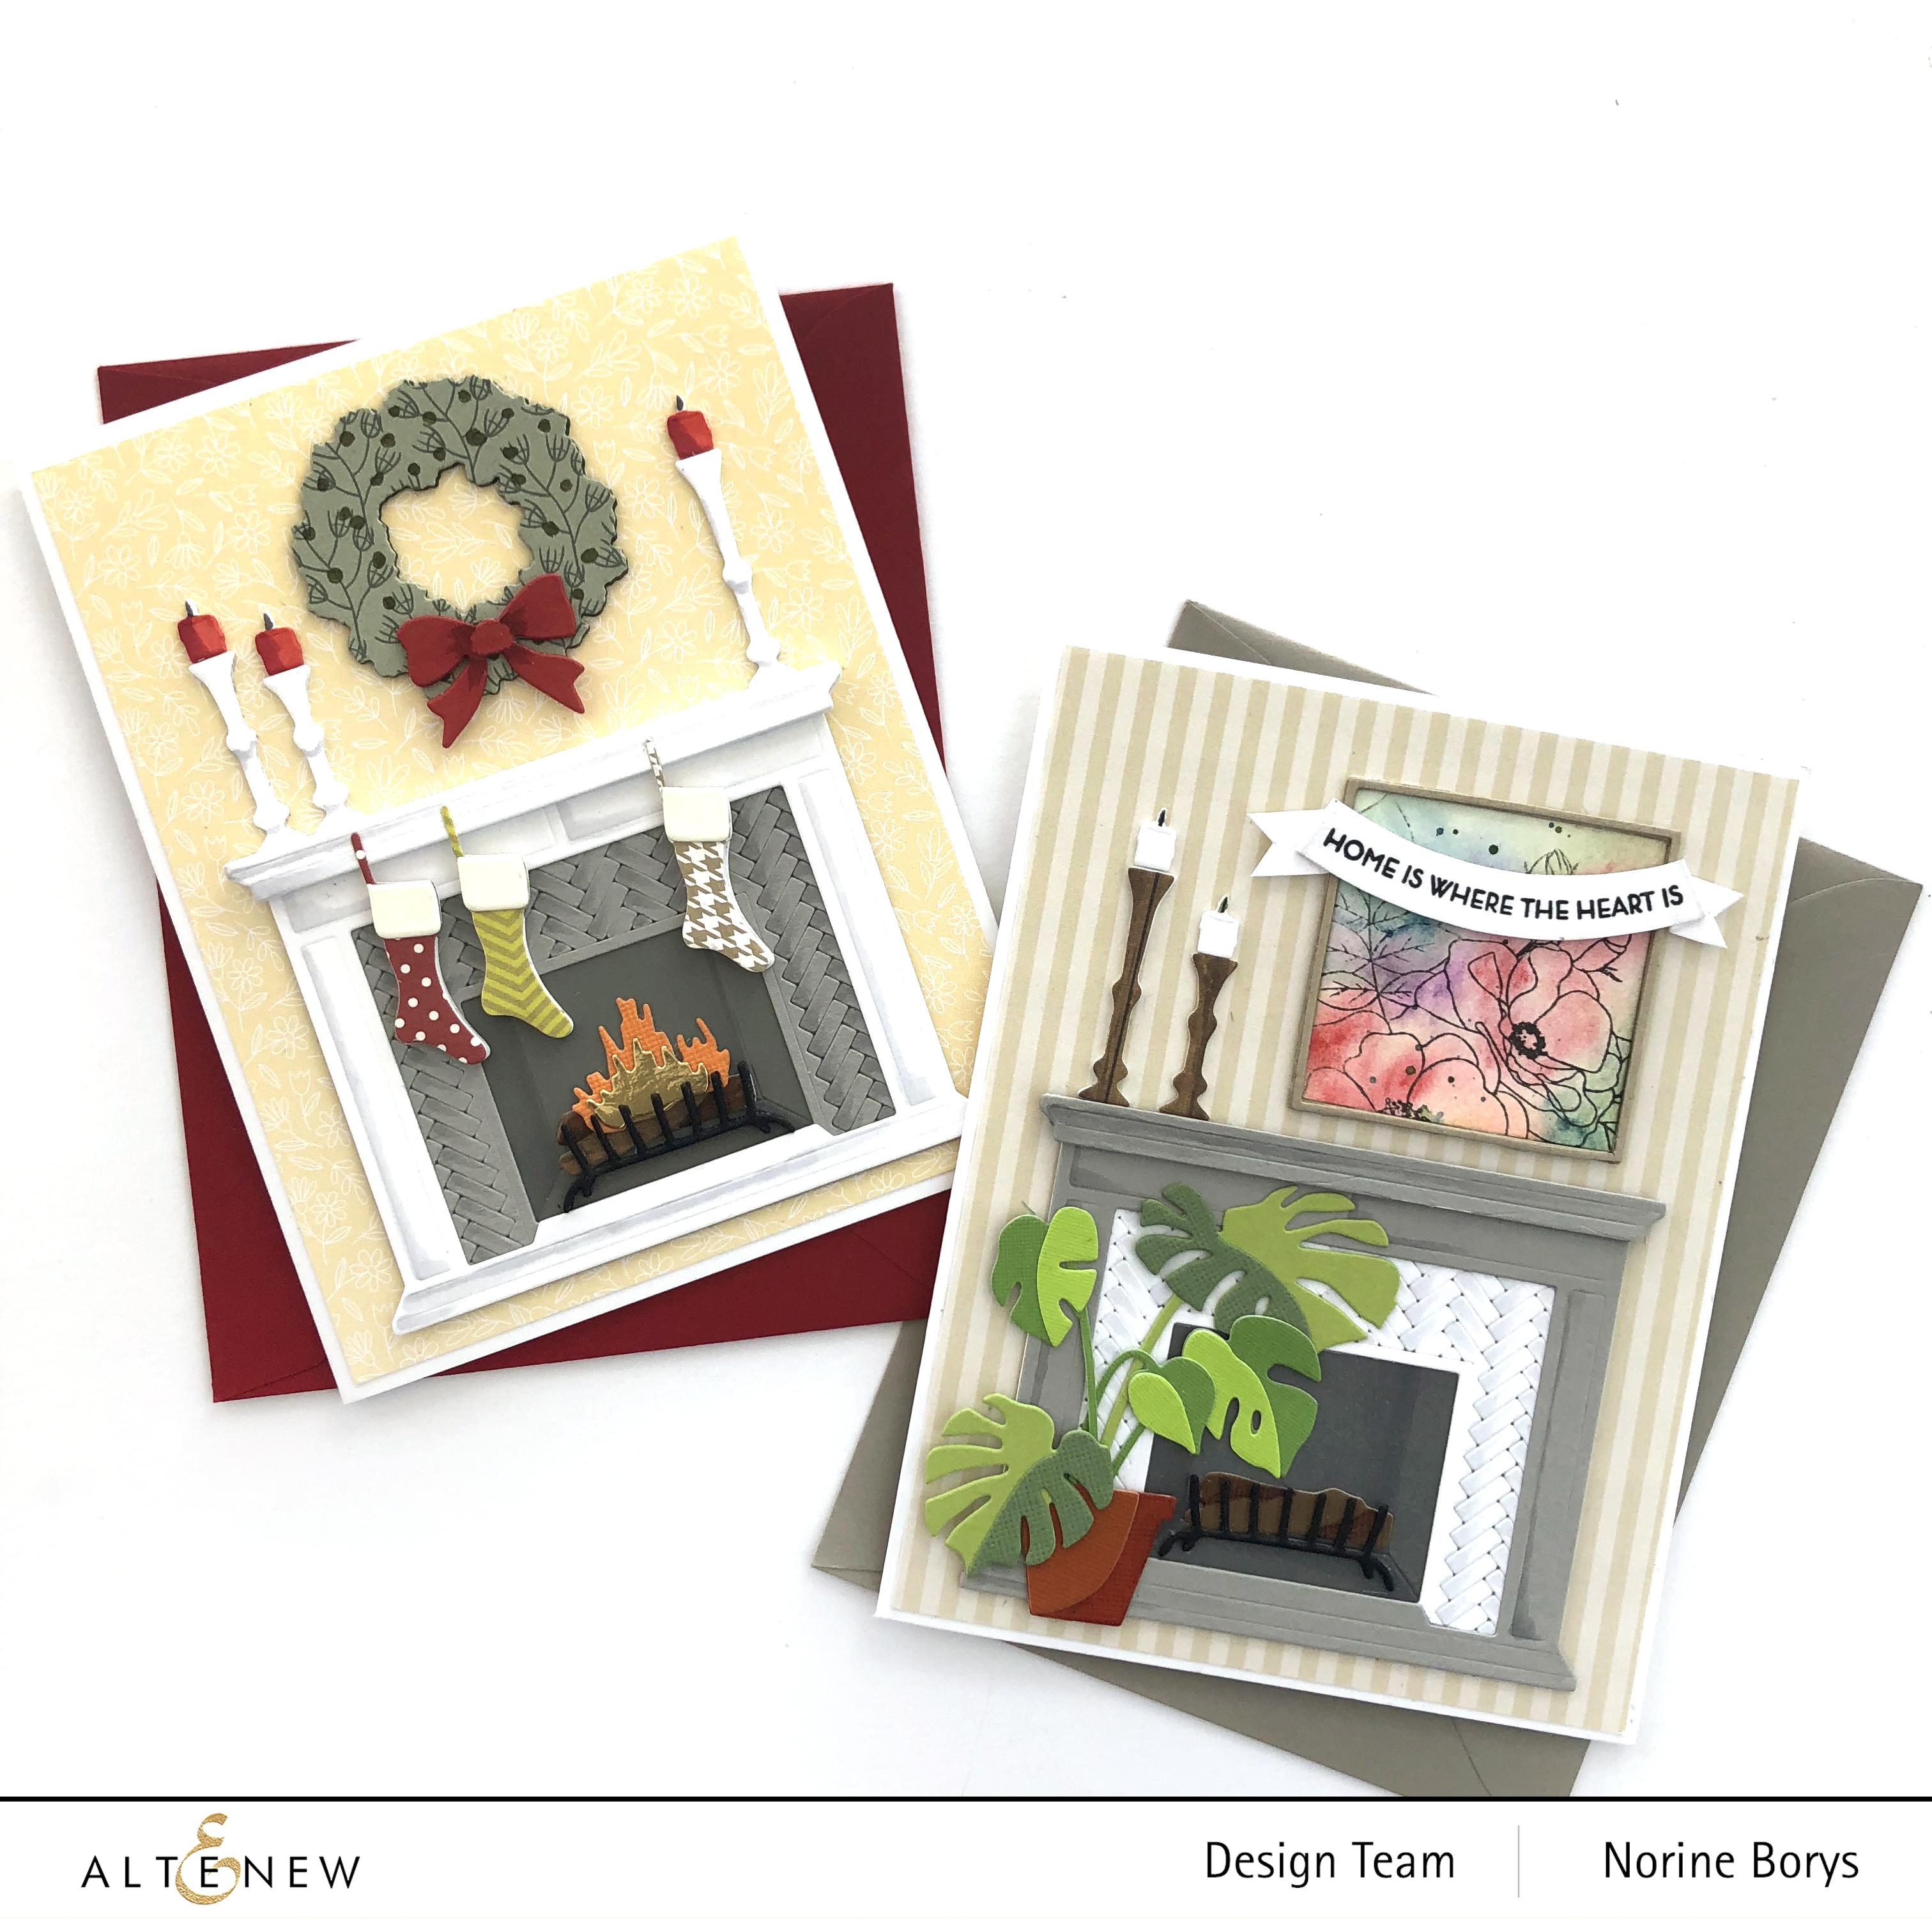 Scrapbook & Cards Today Blog: Day 21 of our Partner Celebration with Stamp-n -Storage!